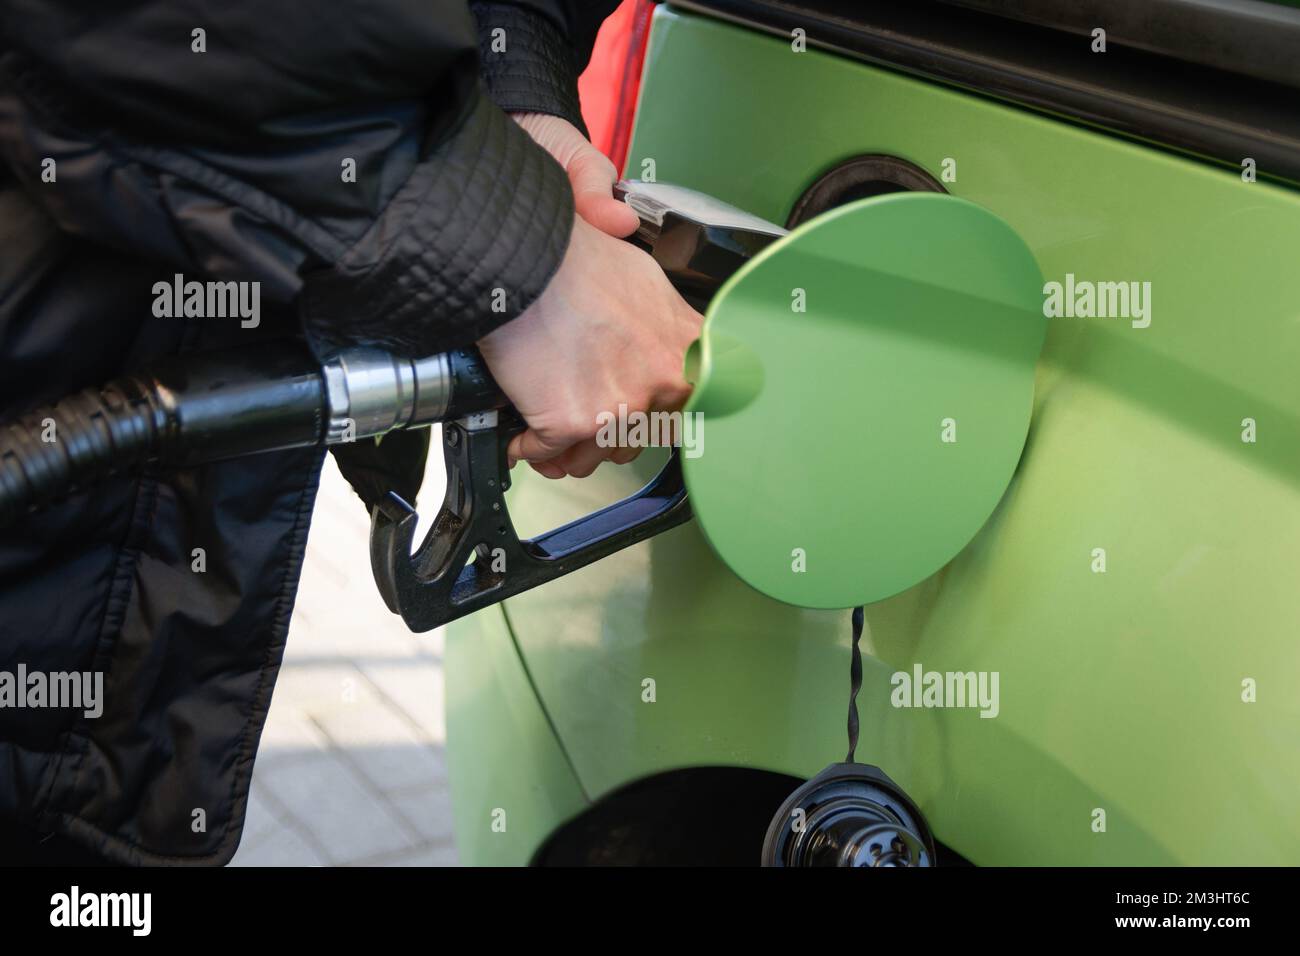 Filling up the car. In a gas station, a woman fills her gas tank Stock Photo